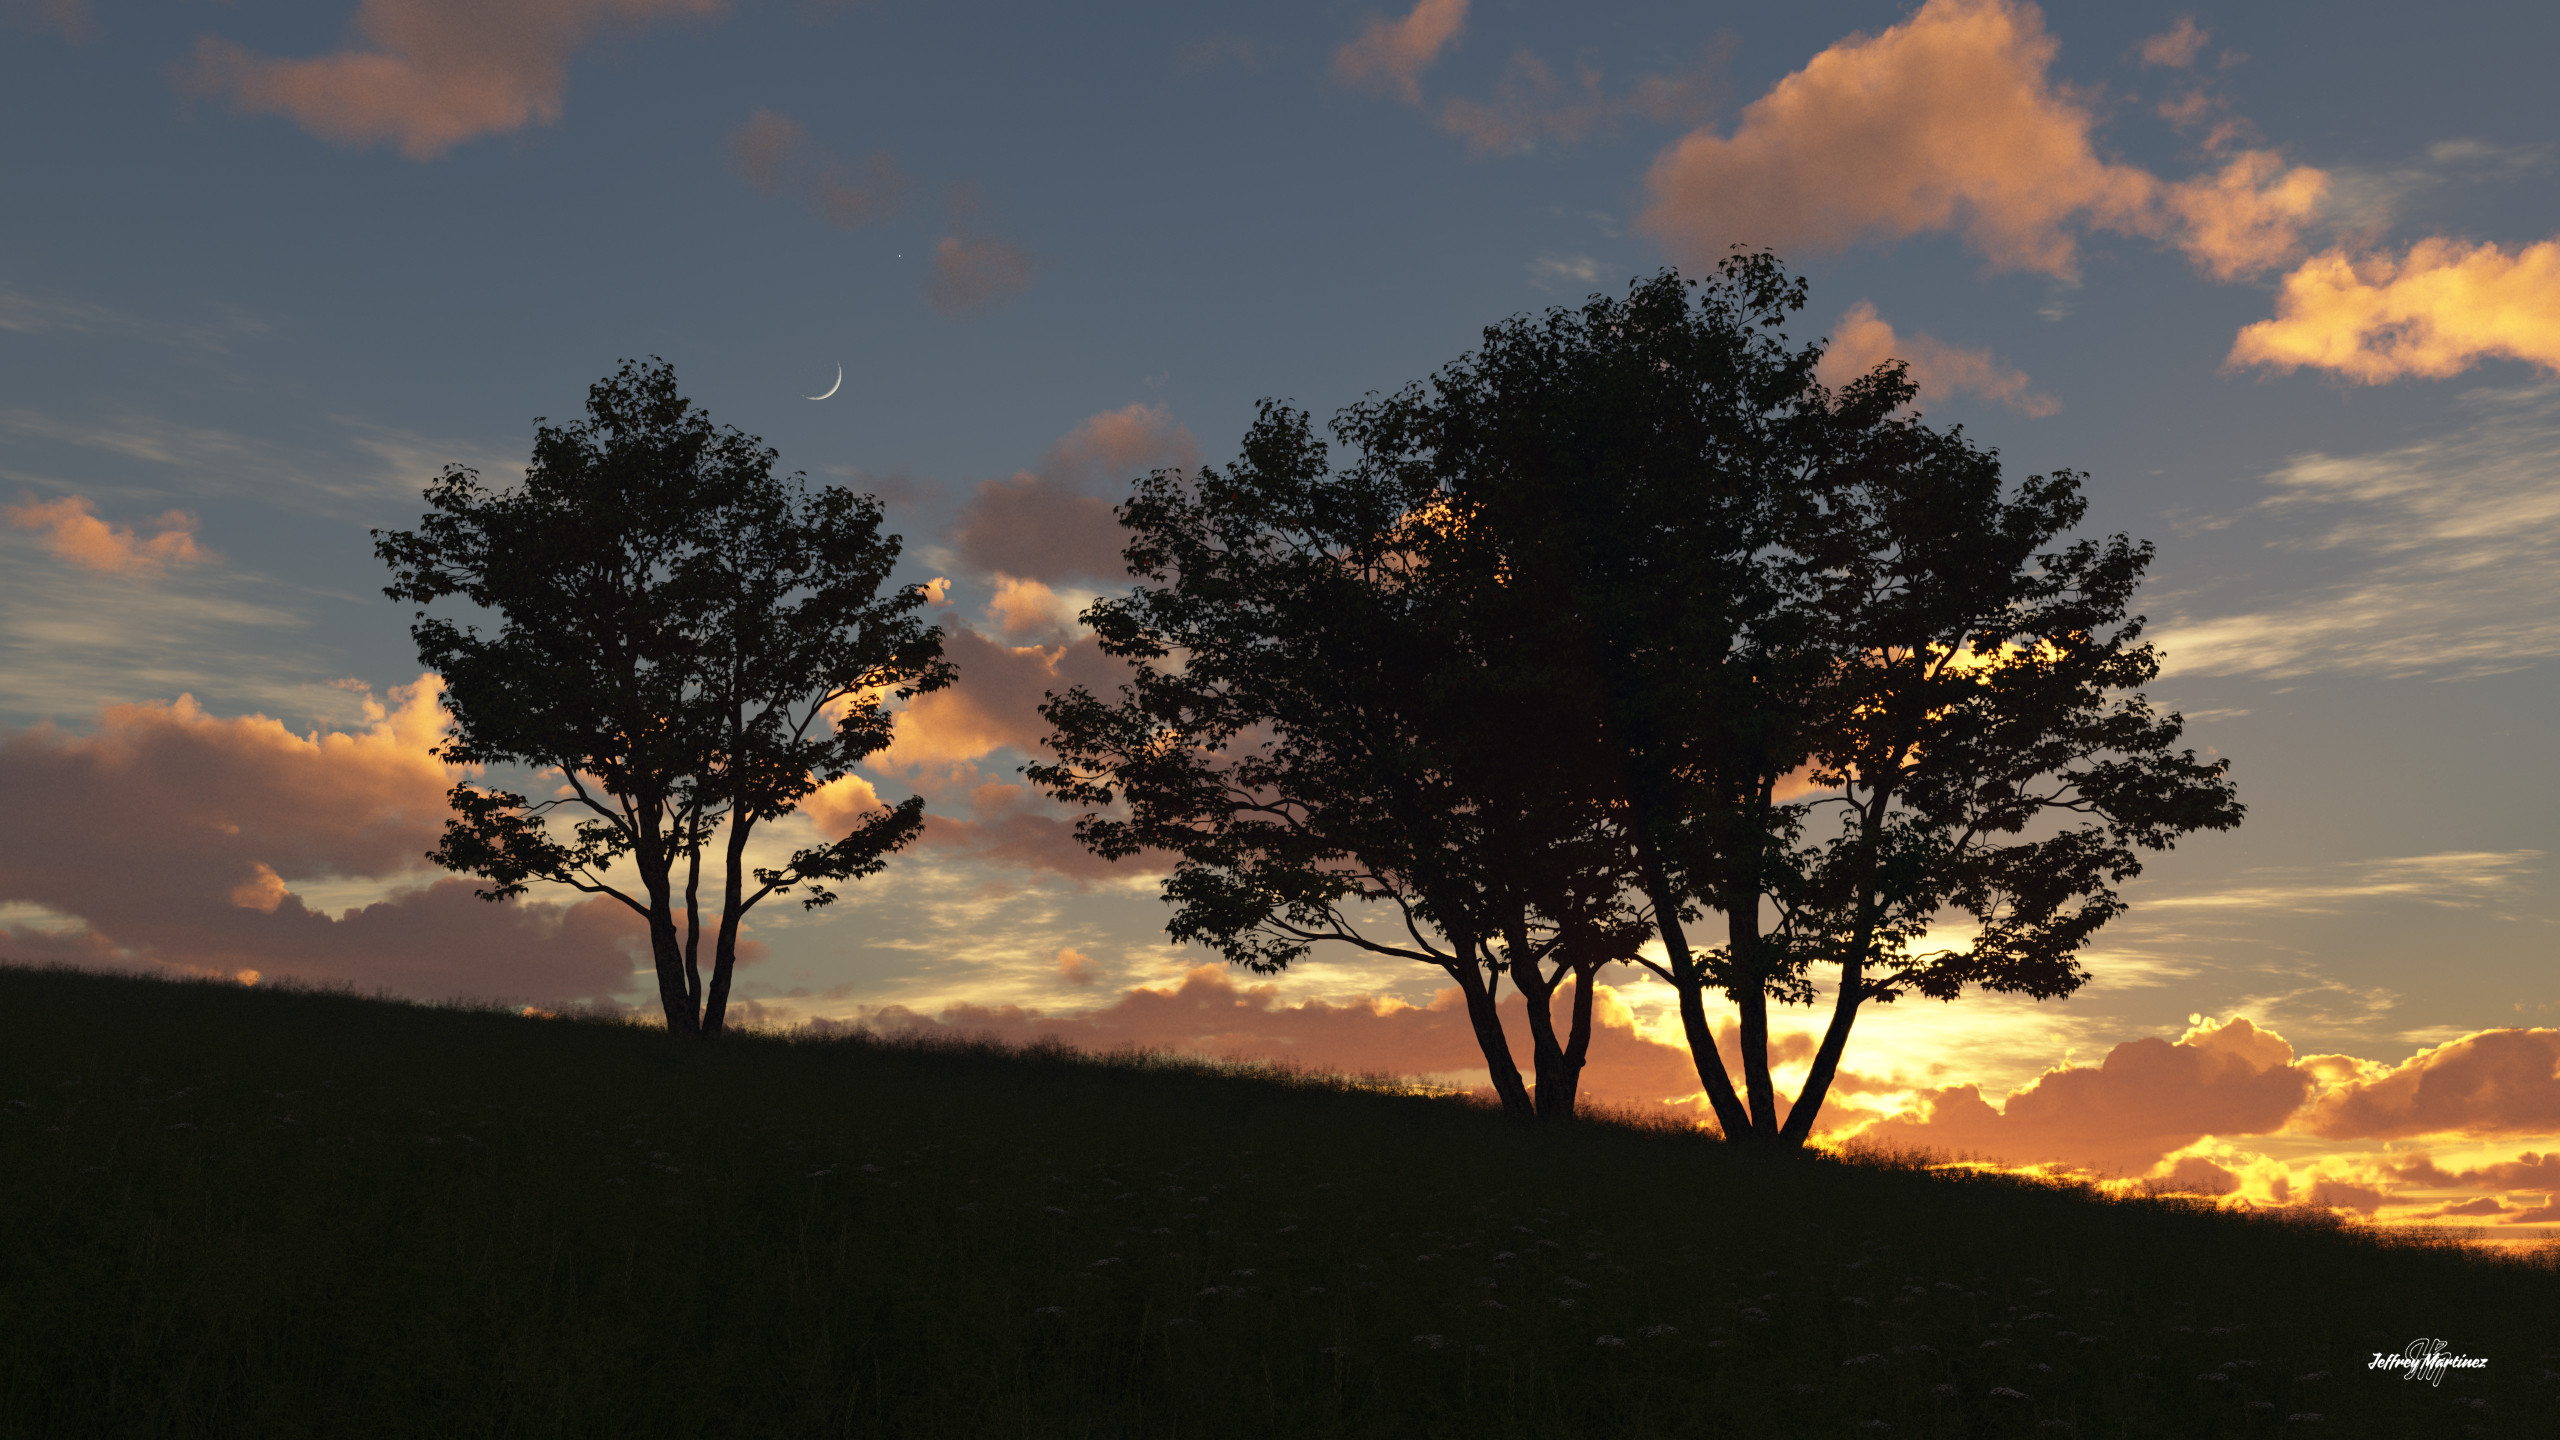 Trees on a Hill - Sunset
20220622TG